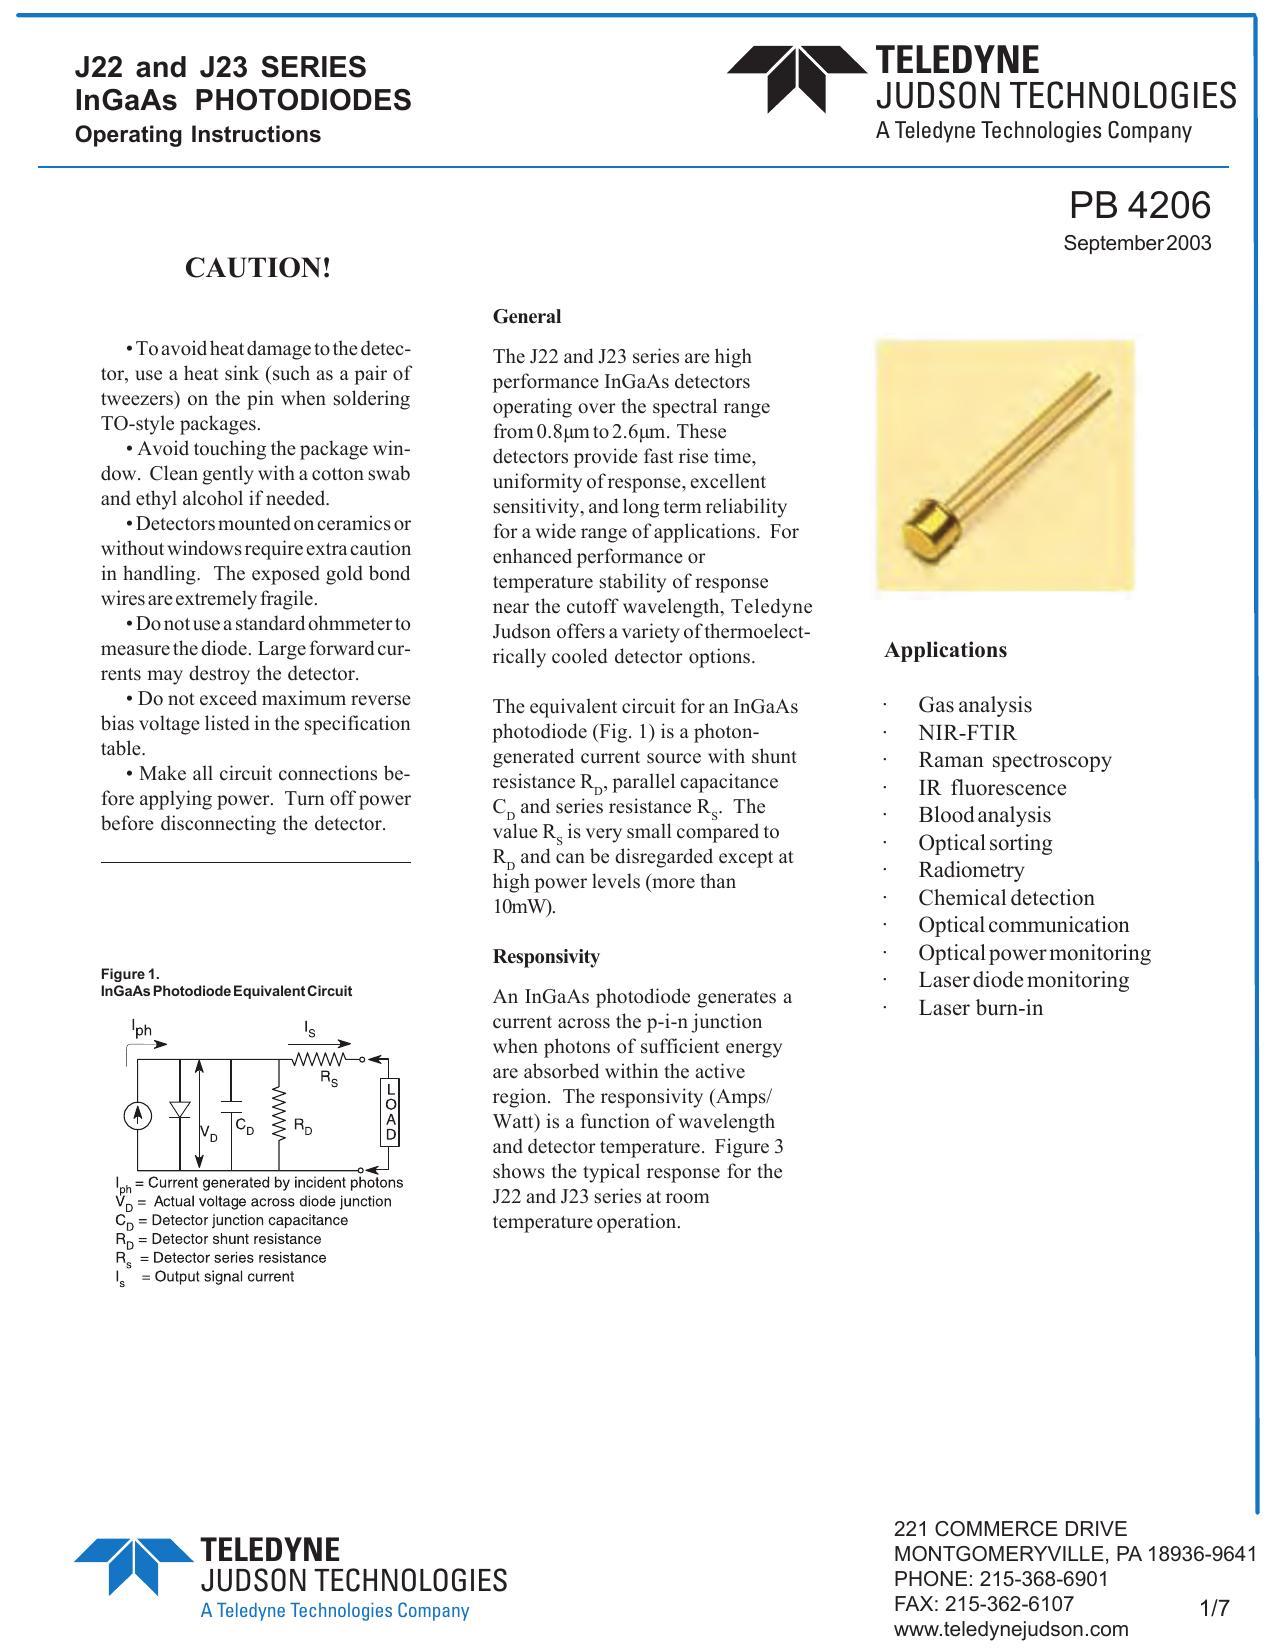 j22-and-j23-series-ingaas-photodiodes-operating-instructions.pdf